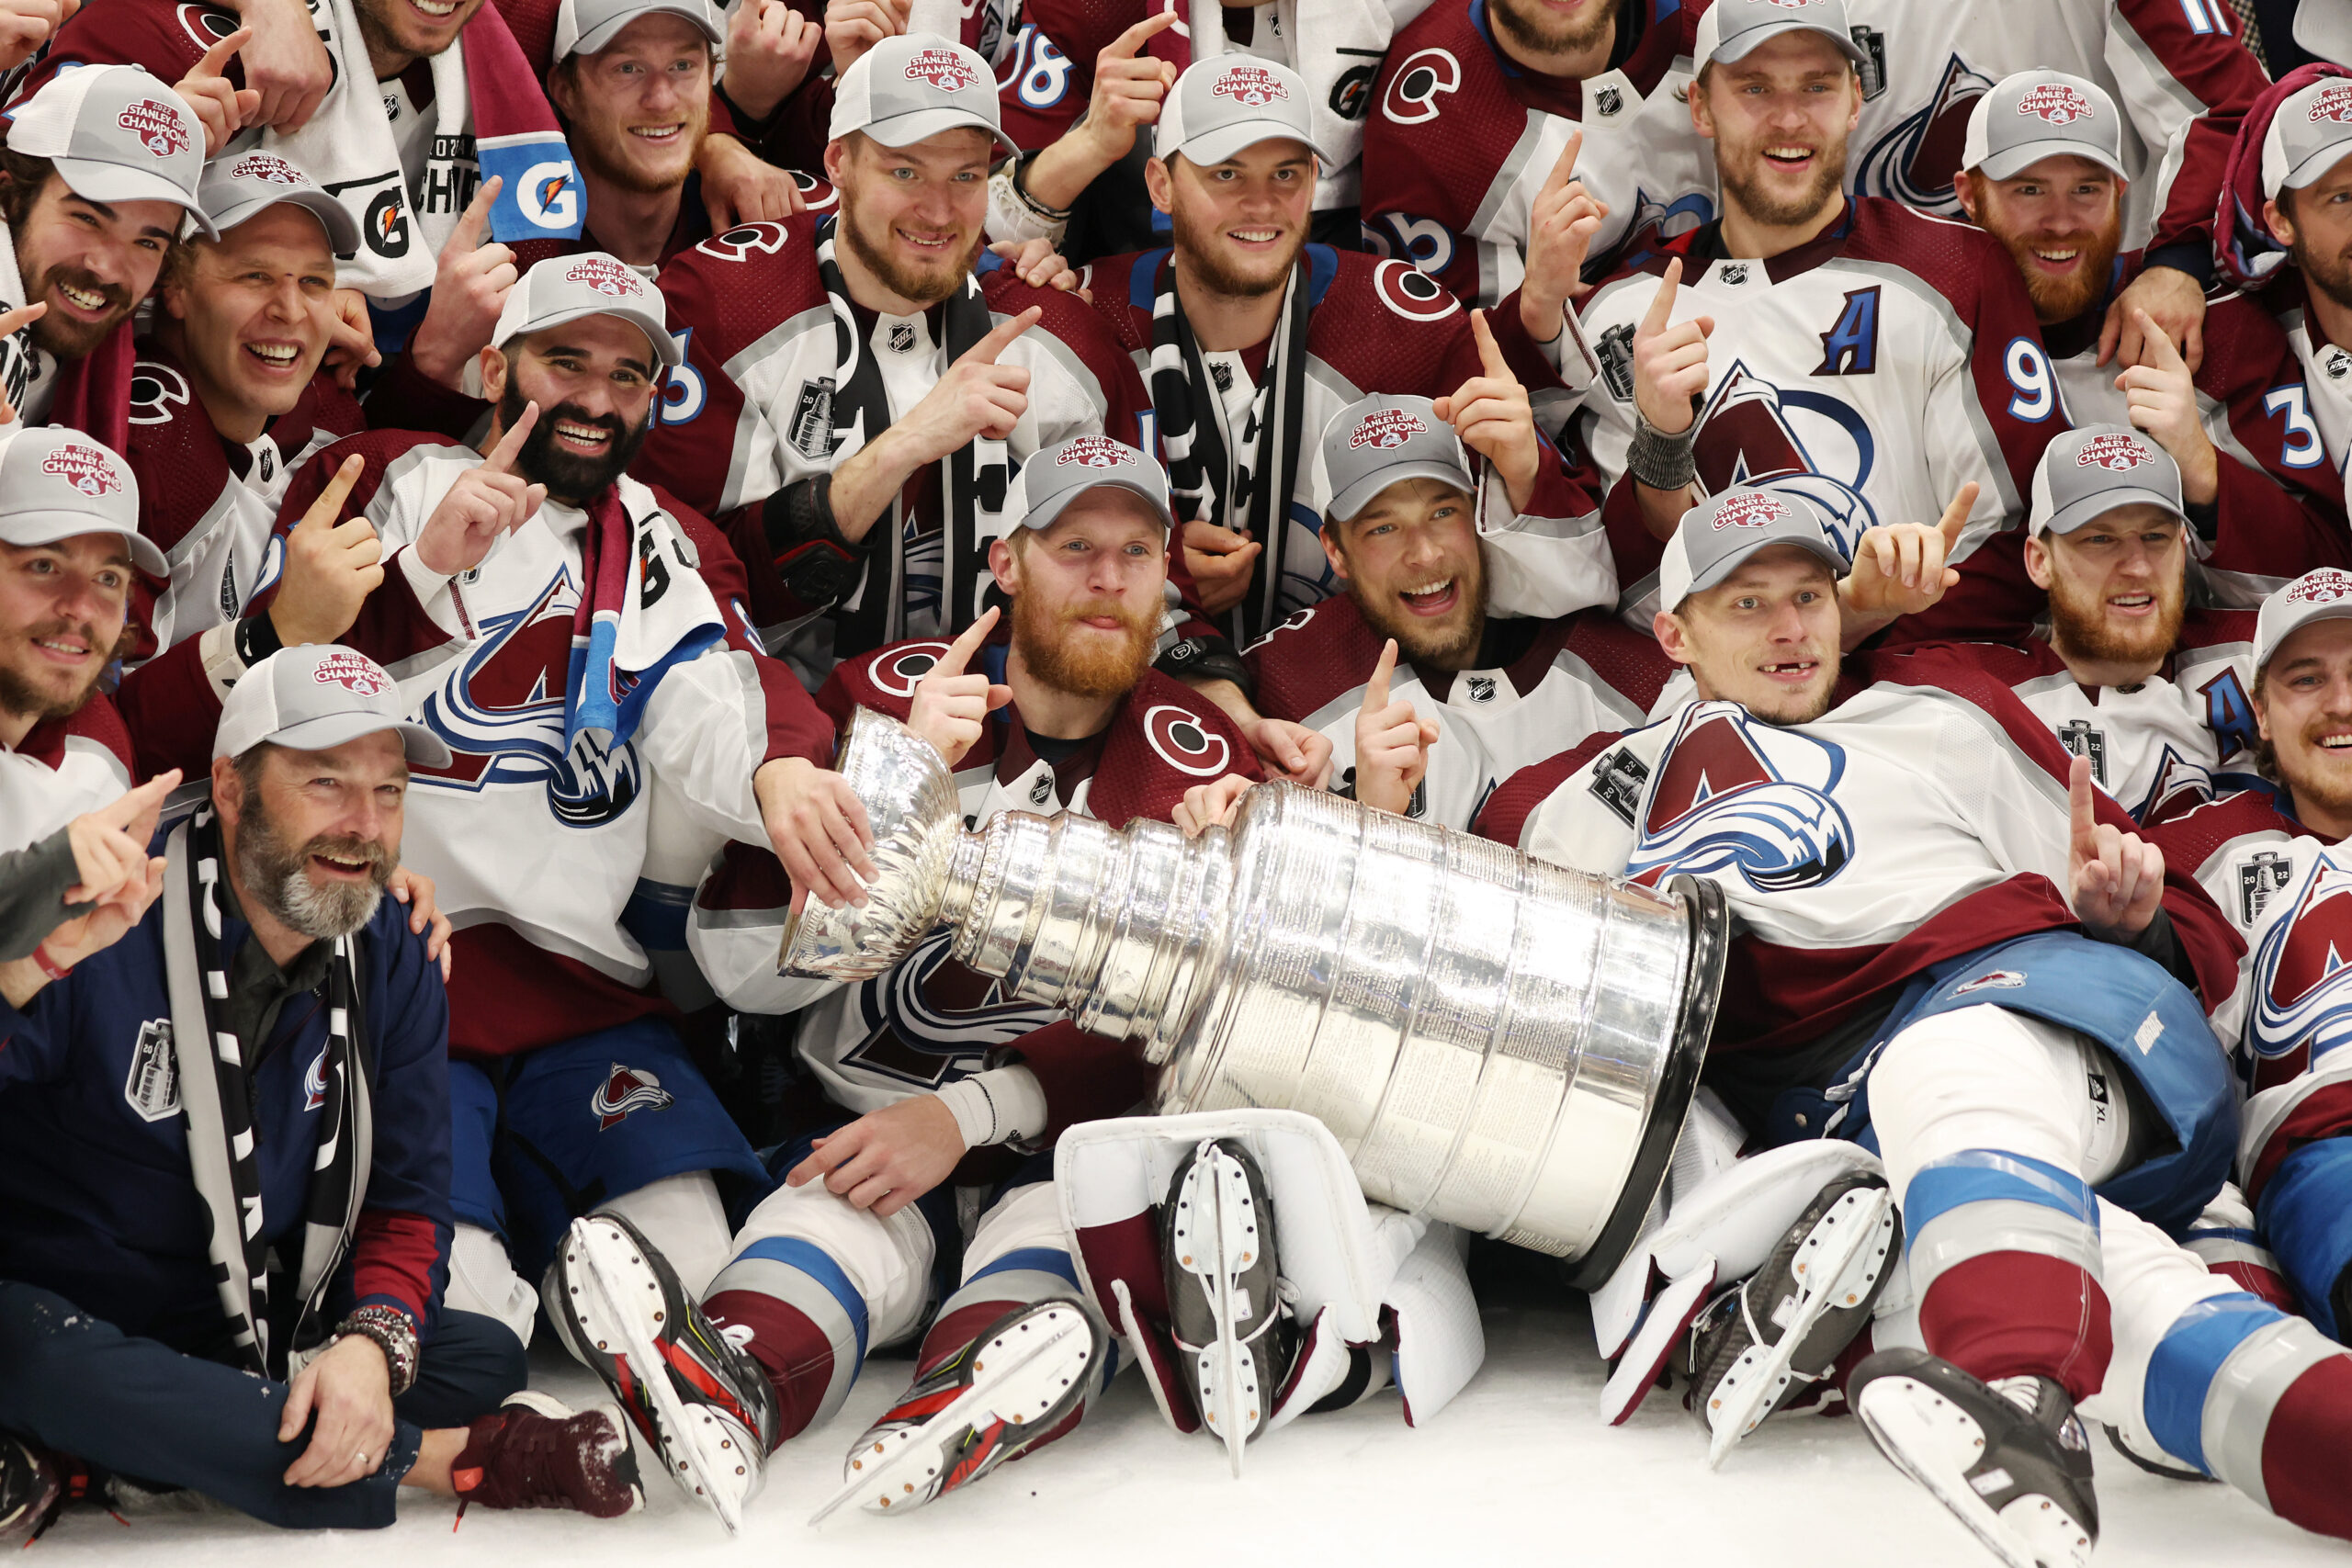 Colorado Avalanche Too Many Men Stanley Cup Champions 2022 